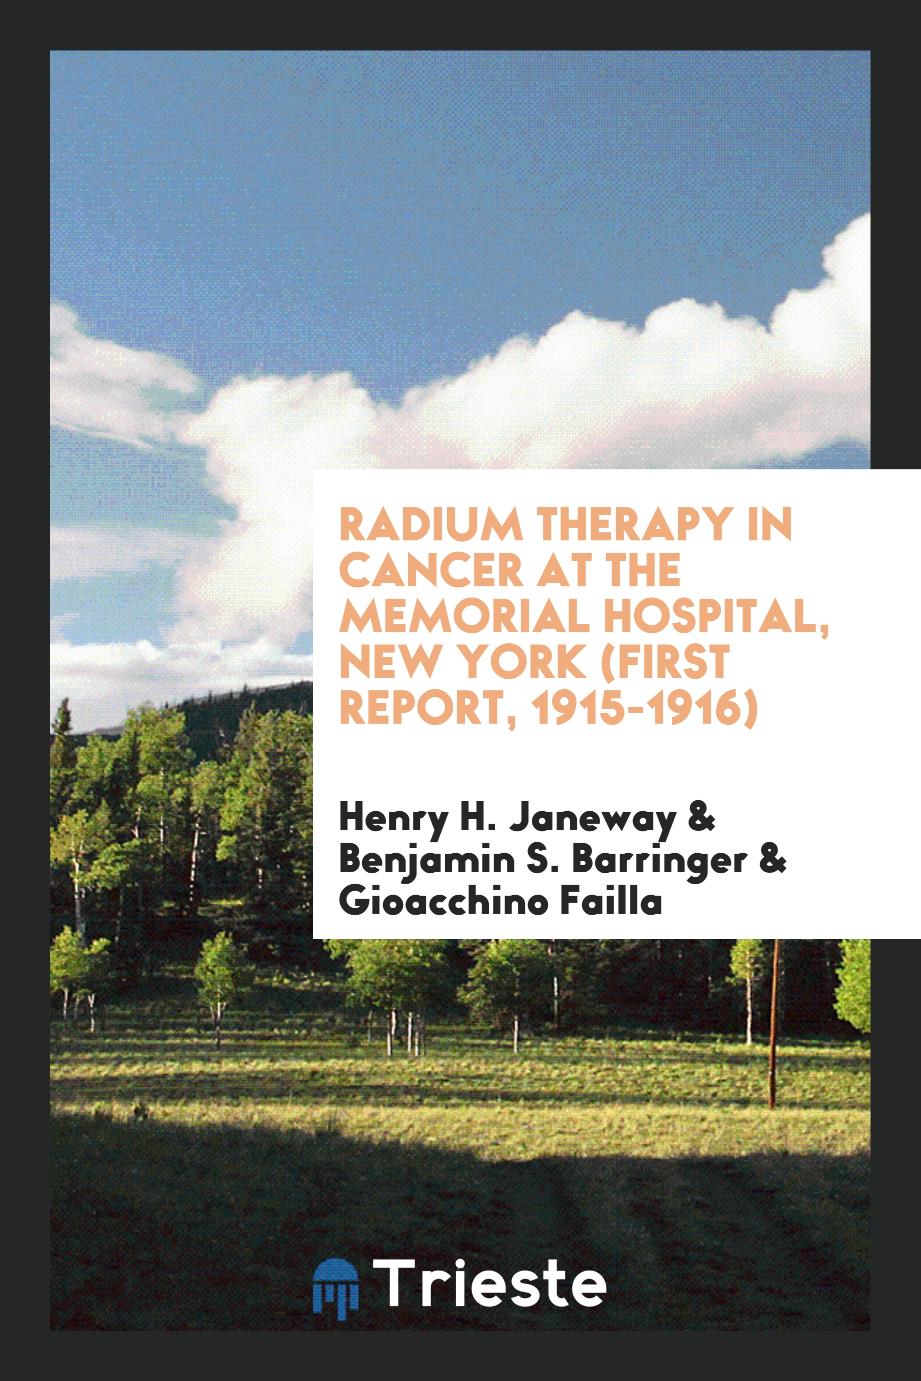 Radium Therapy in Cancer at the Memorial Hospital, New York (First Report, 1915-1916)